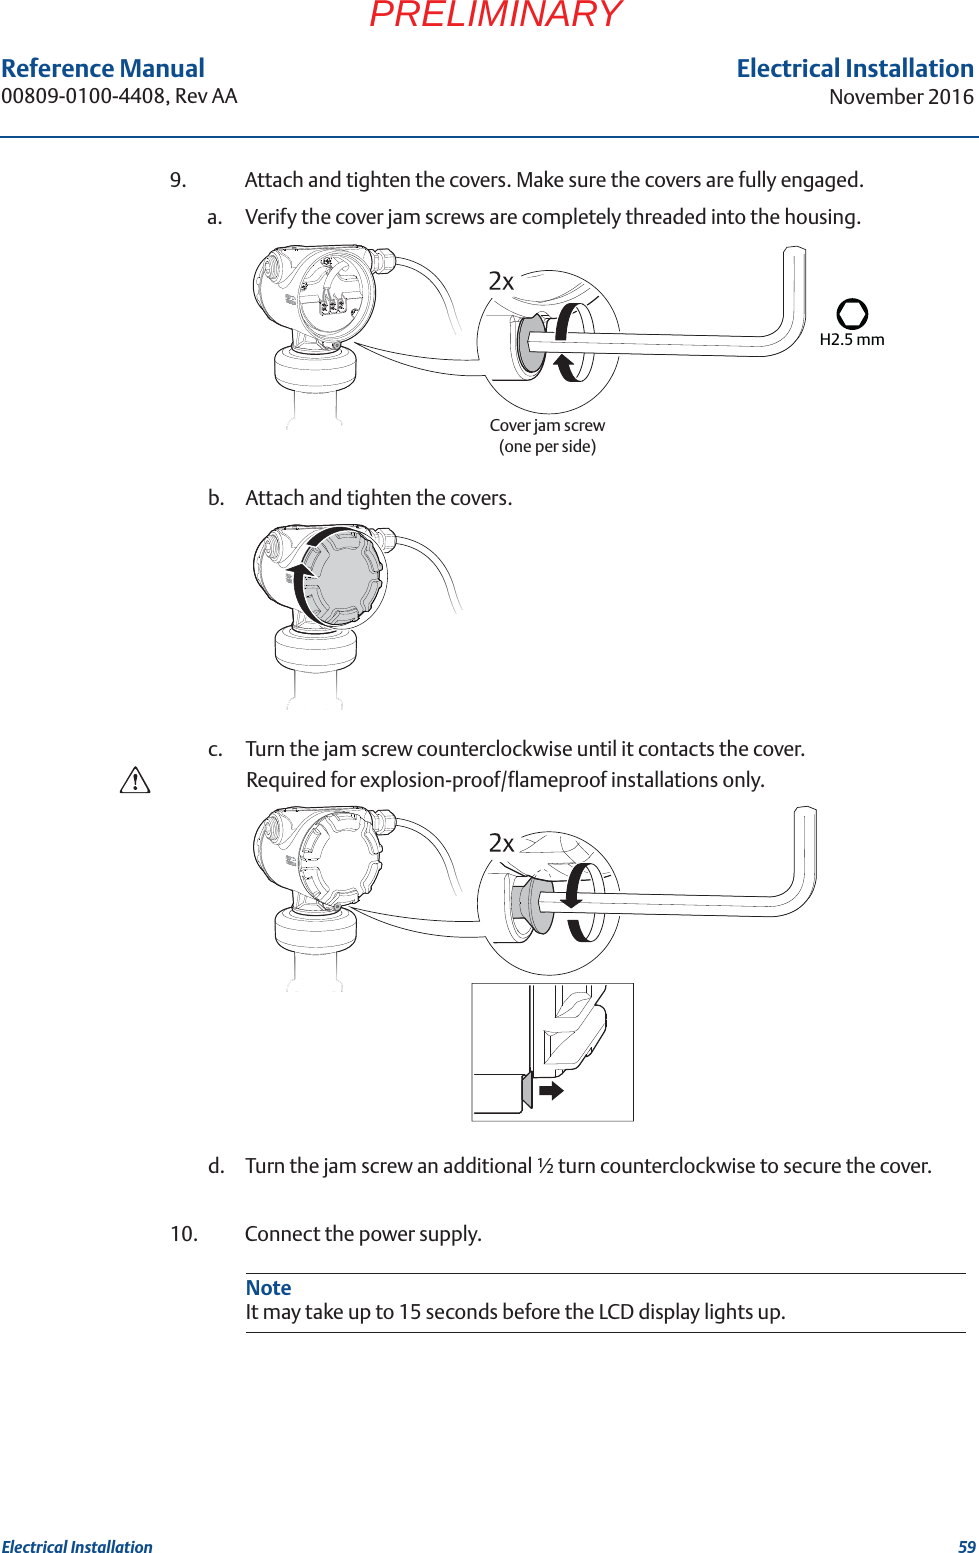 59Reference Manual 00809-0100-4408, Rev AAElectrical InstallationNovember 2016Electrical InstallationPRELIMINARY9. Attach and tighten the covers. Make sure the covers are fully engaged.a. Verify the cover jam screws are completely threaded into the housing.b. Attach and tighten the covers.c. Turn the jam screw counterclockwise until it contacts the cover.Required for explosion-proof/flameproof installations only.d. Turn the jam screw an additional ½ turn counterclockwise to secure the cover.10. Connect the power supply. H2.5 mmCover jam screw(one per side)NoteIt may take up to 15 seconds before the LCD display lights up.